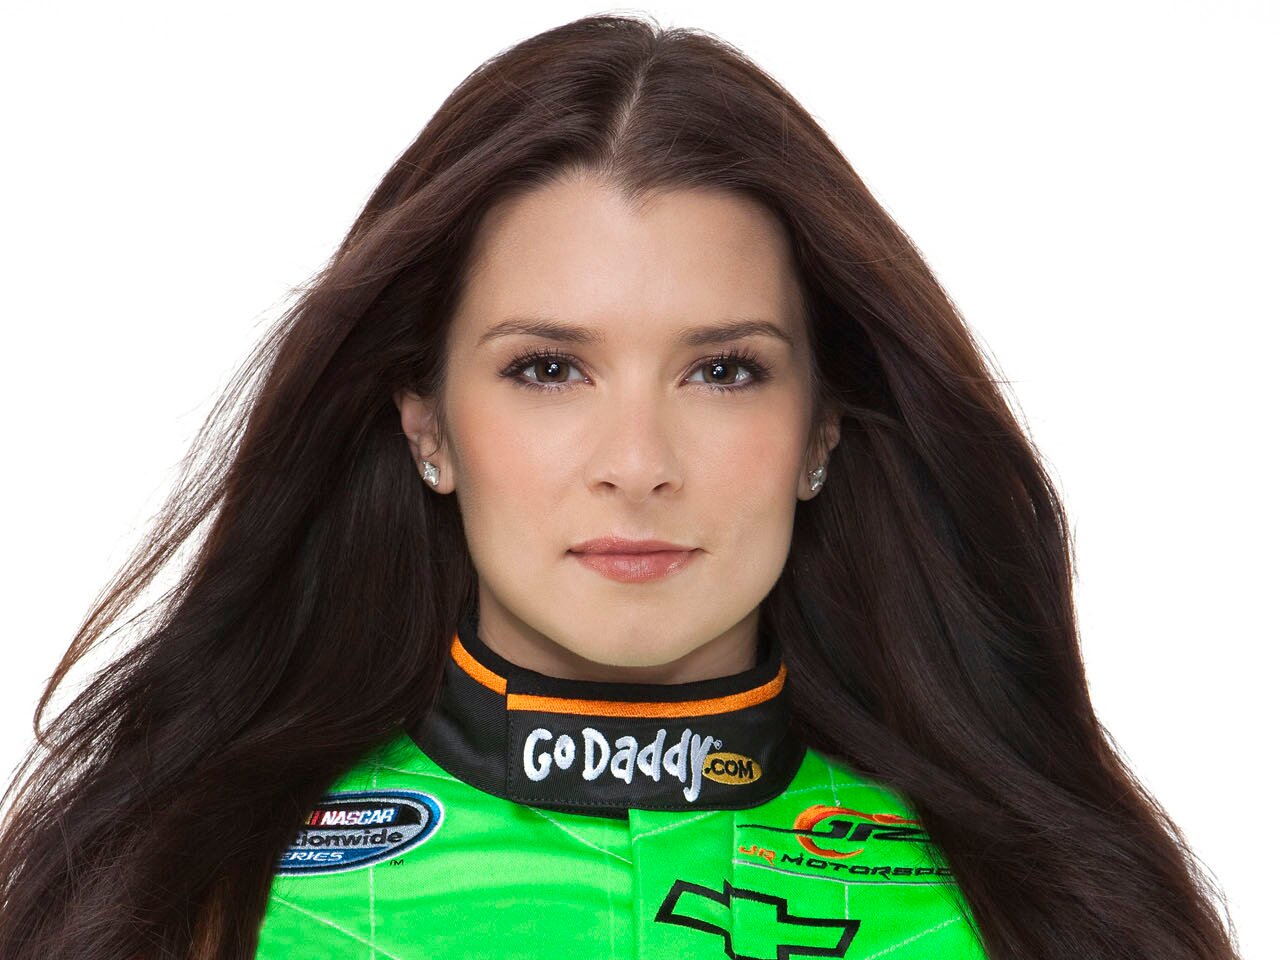 how much money did godady make from danica patrick